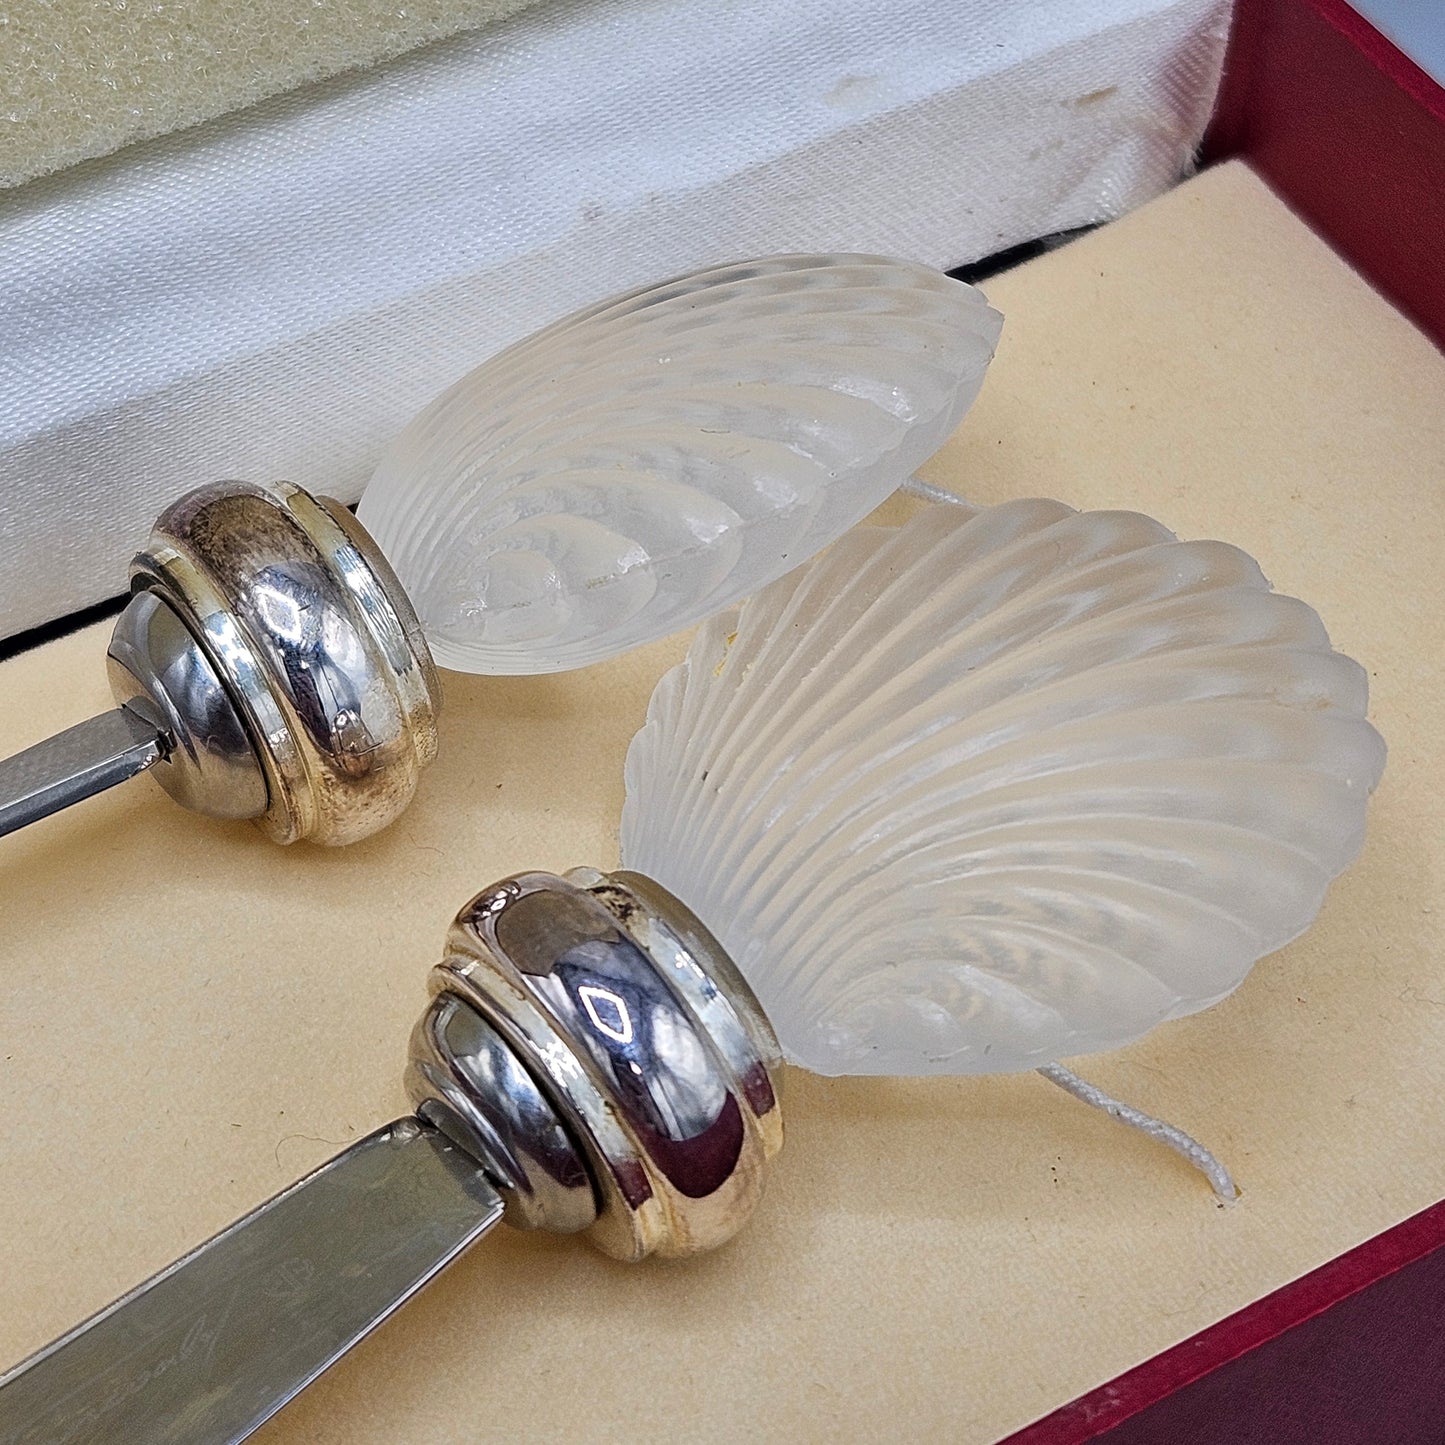 Vintage Hans Turnwald Shell Boxed Cheese Set